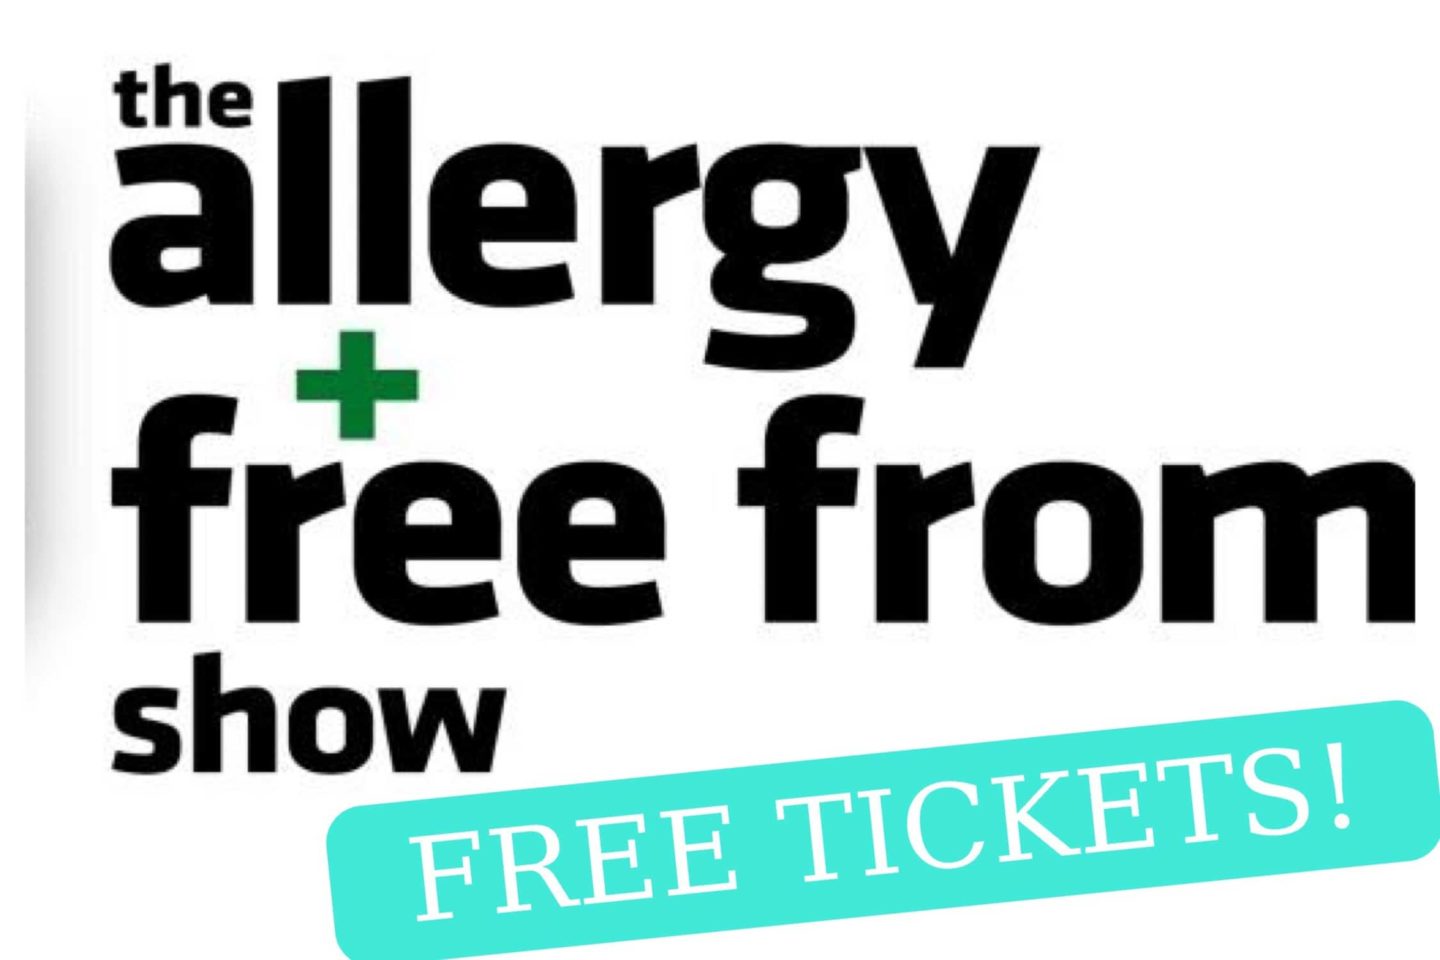 allergy & free from show 2015